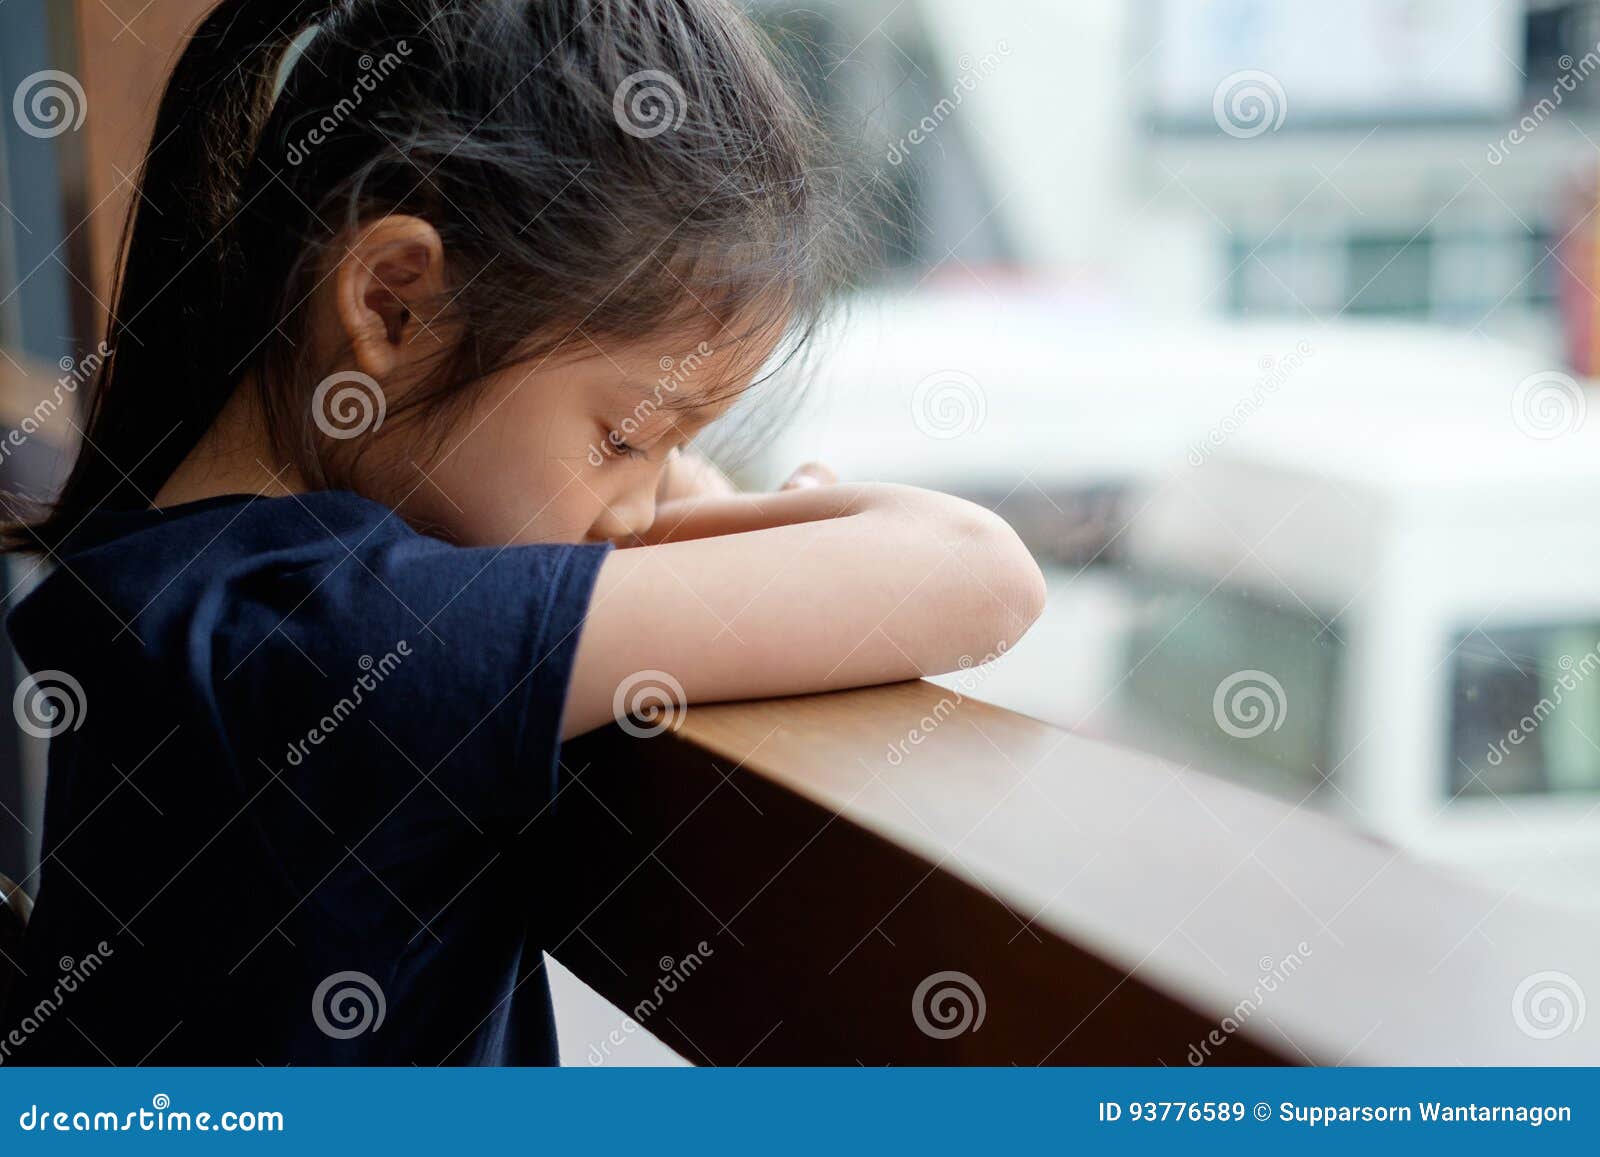 Sad and Lonely Asian Child Next To Window Stock Image - Image of ...